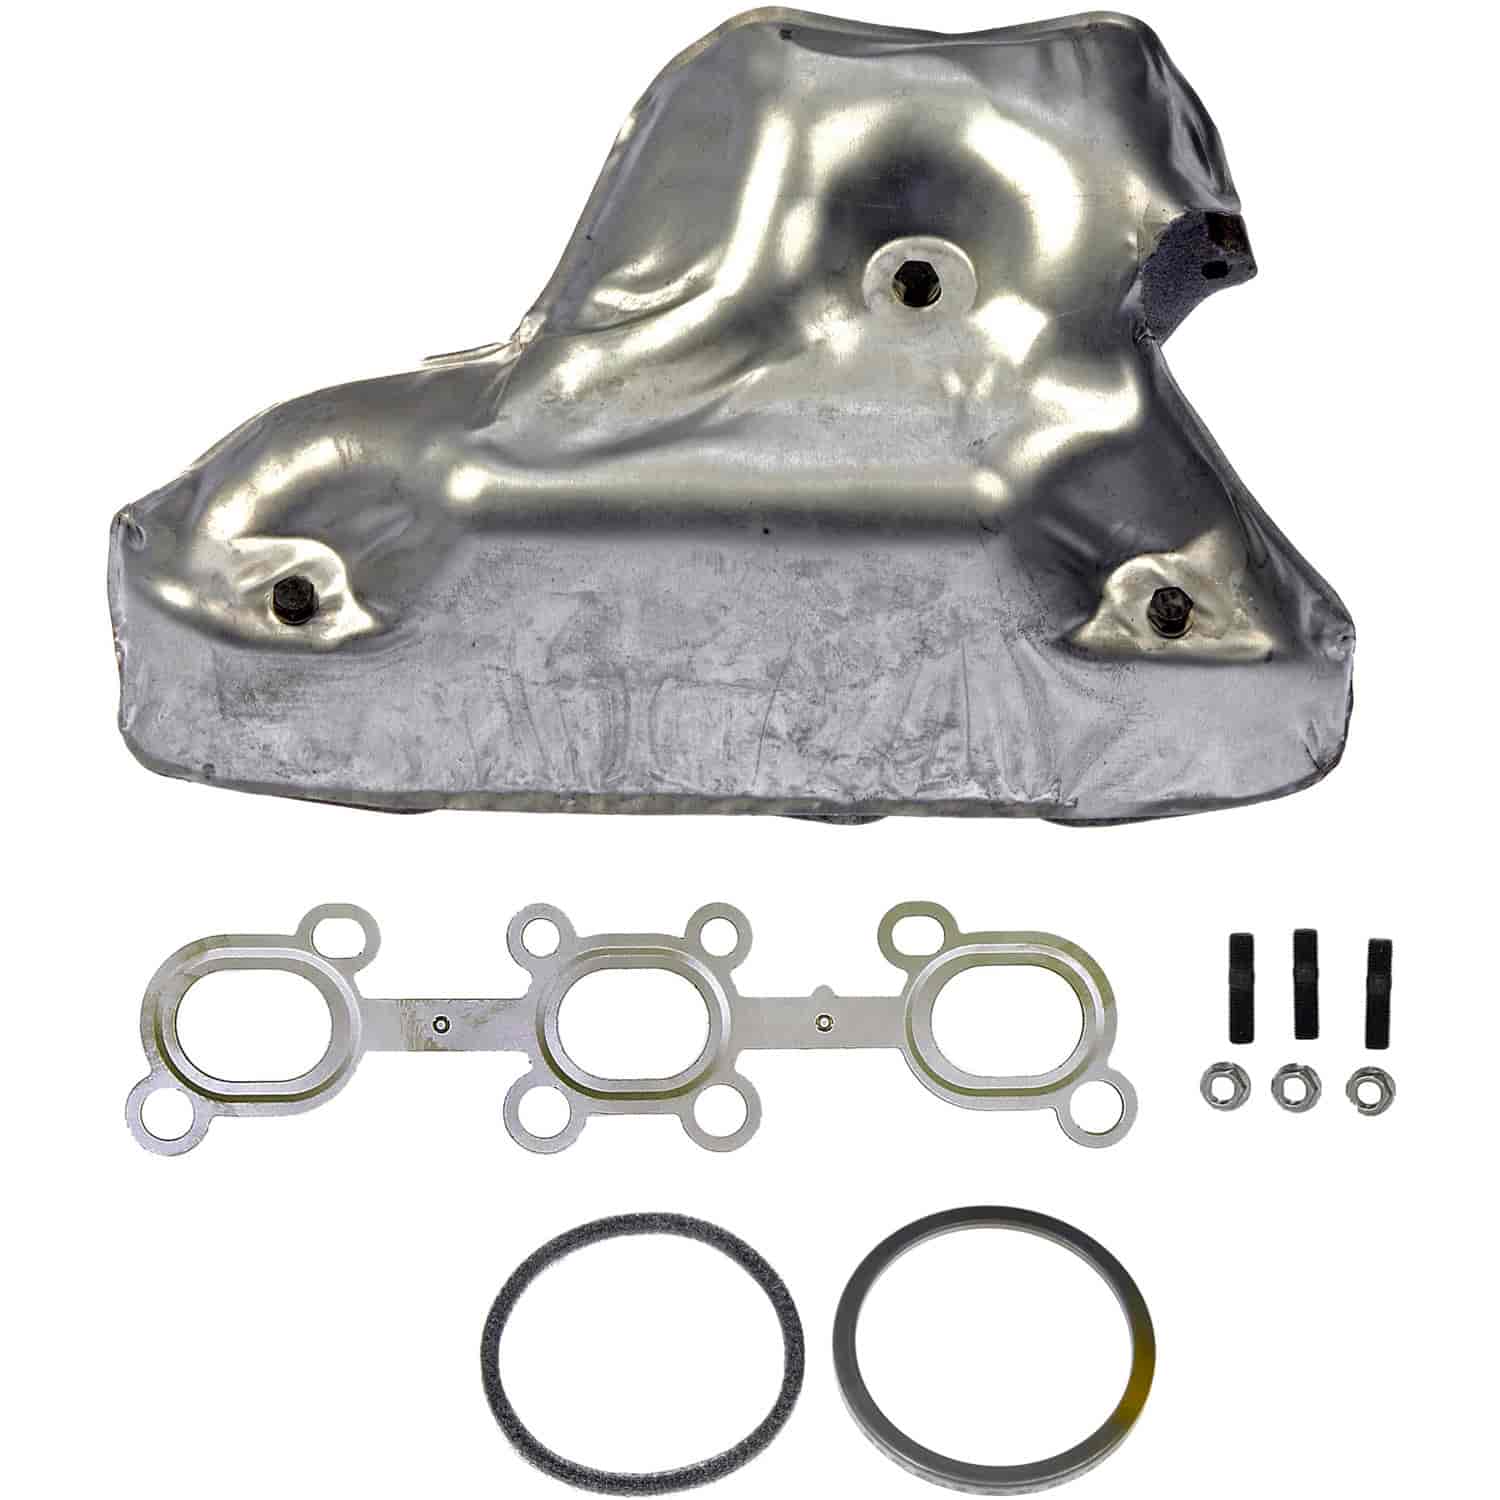 Cast Iron Exhaust Manifold. Includes Gaskets and Hardware to Downpipe